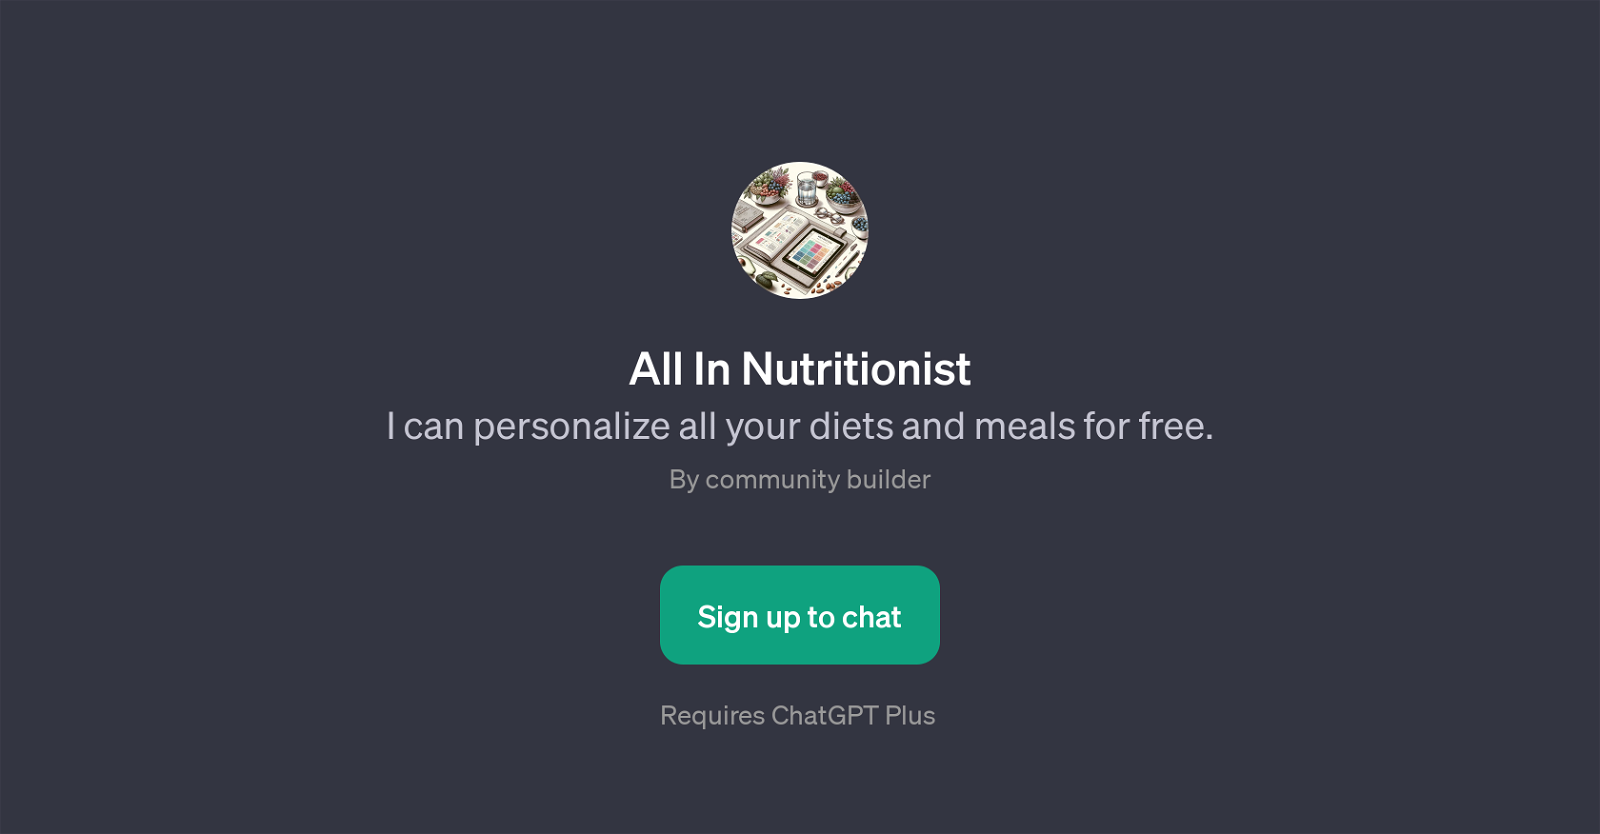 All In Nutritionist website